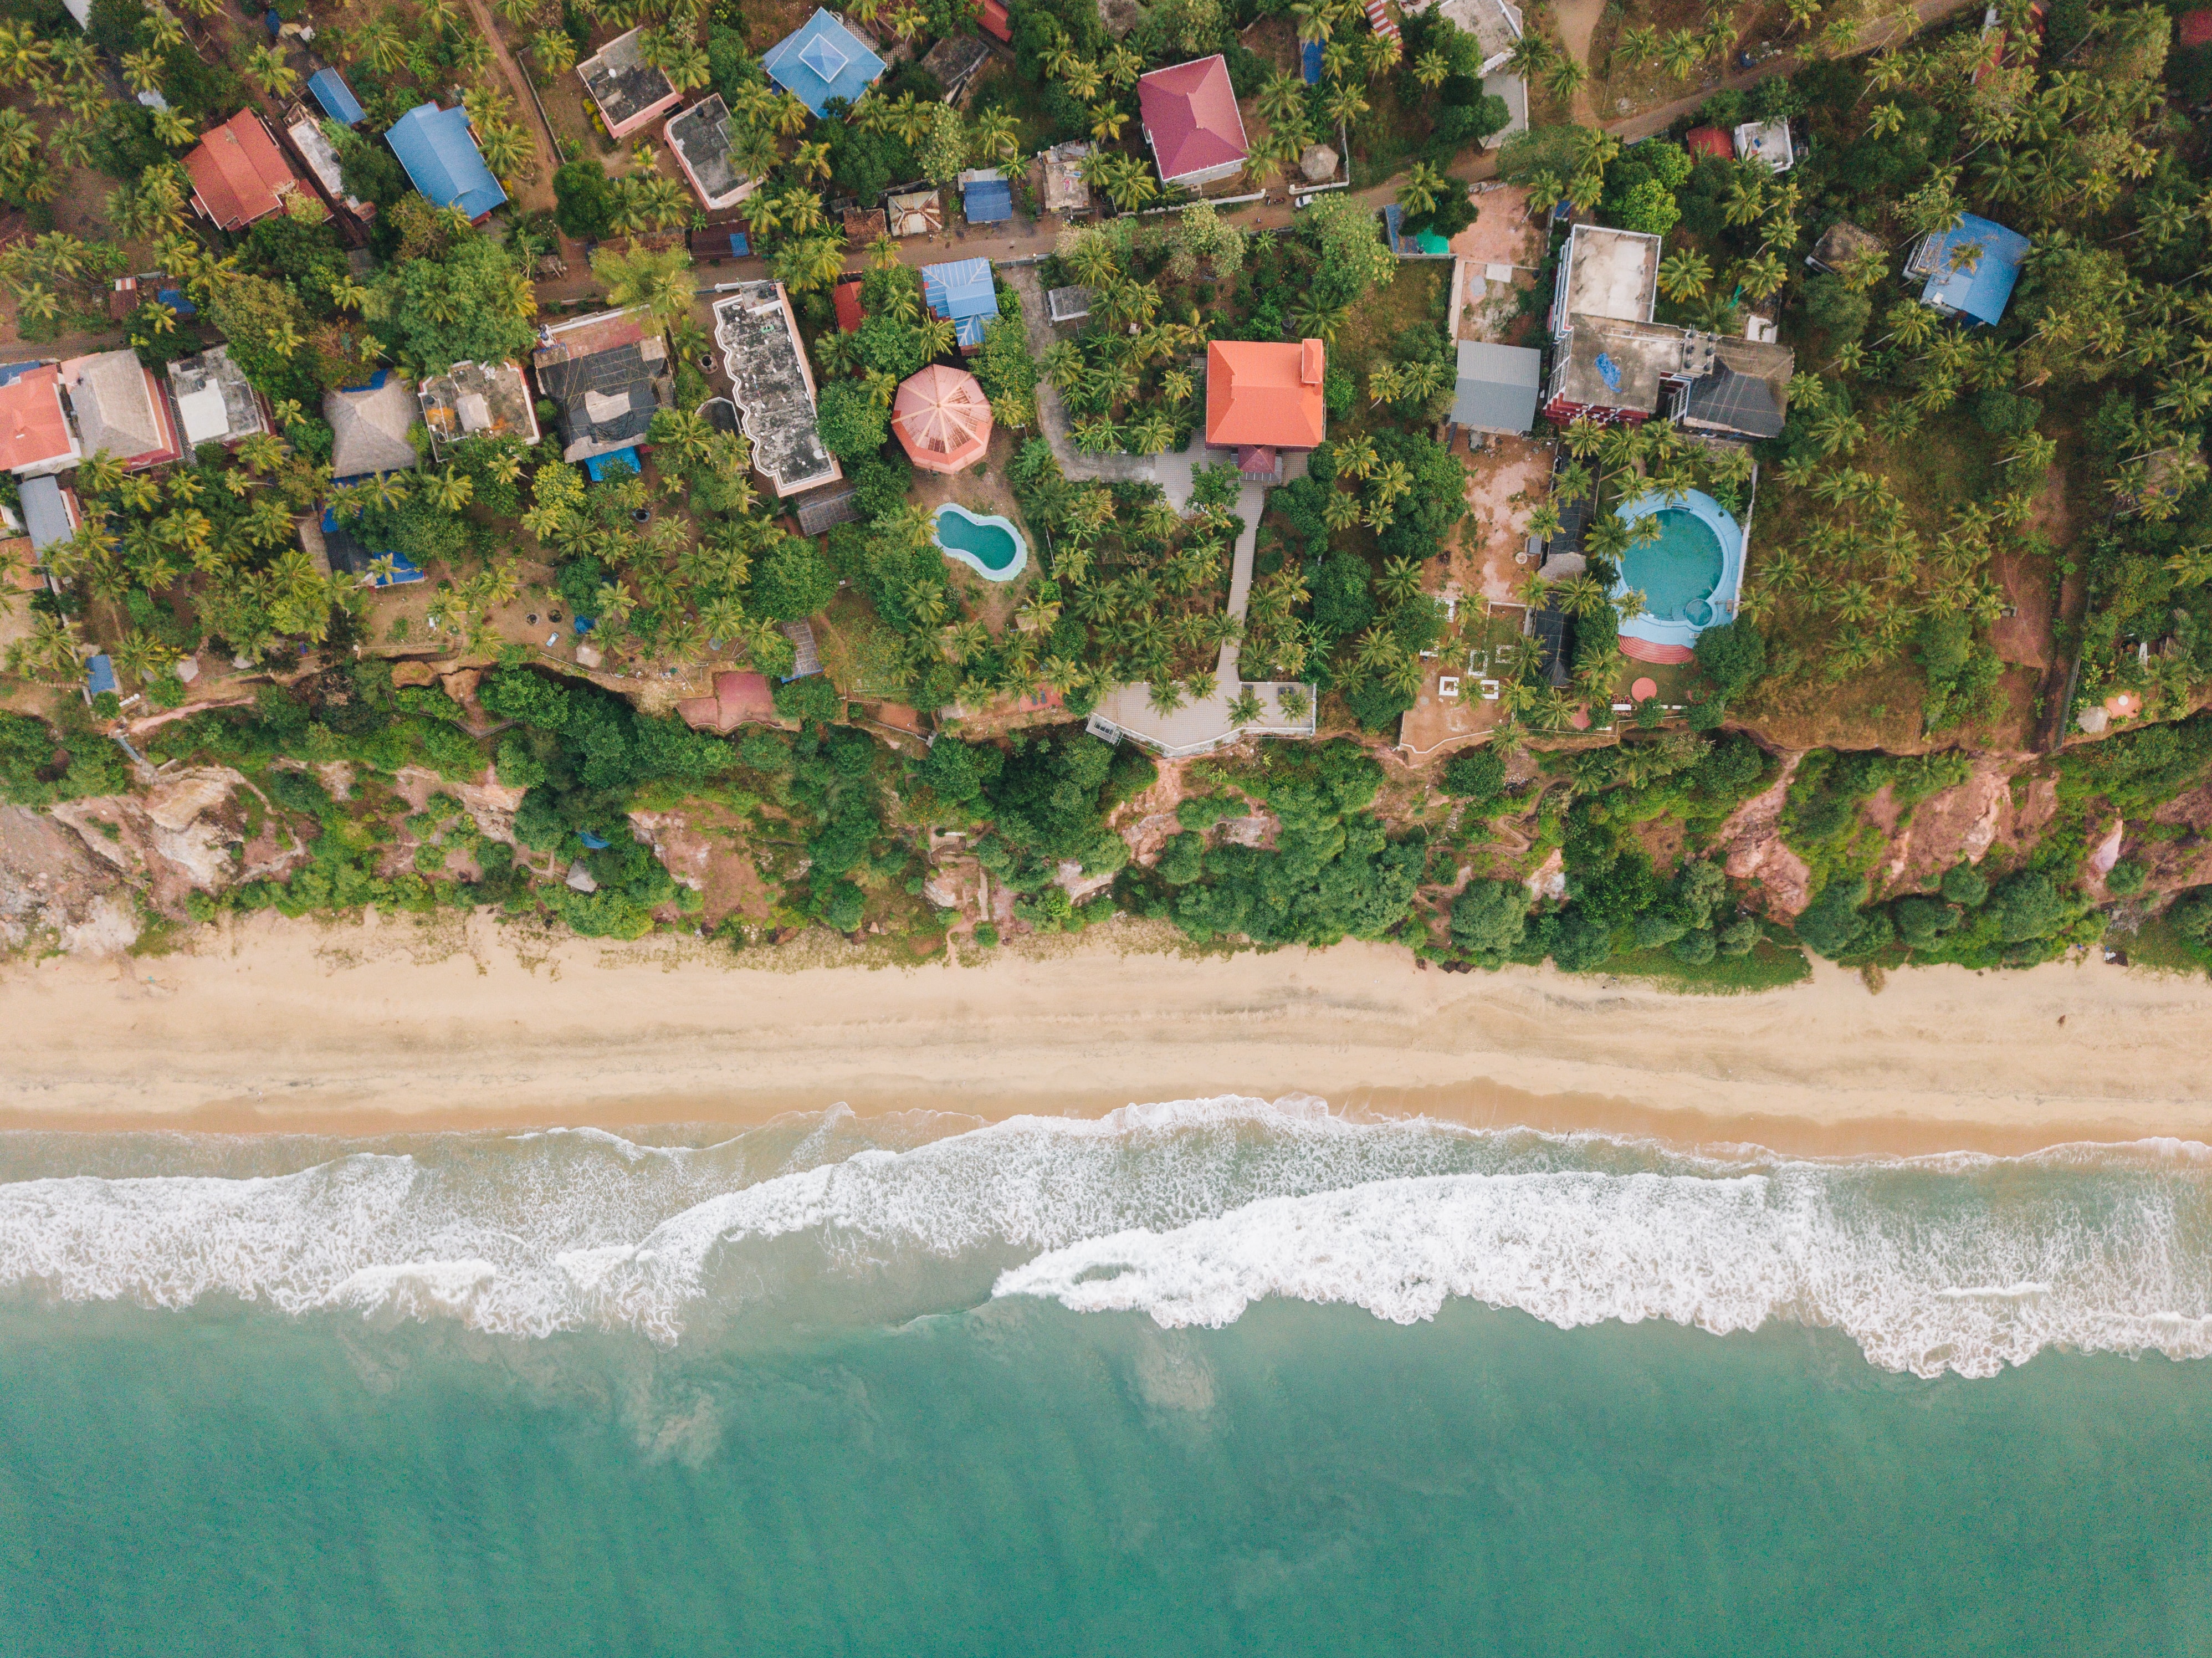 shore, view from above, nature, beach, palms, building, bank Full HD